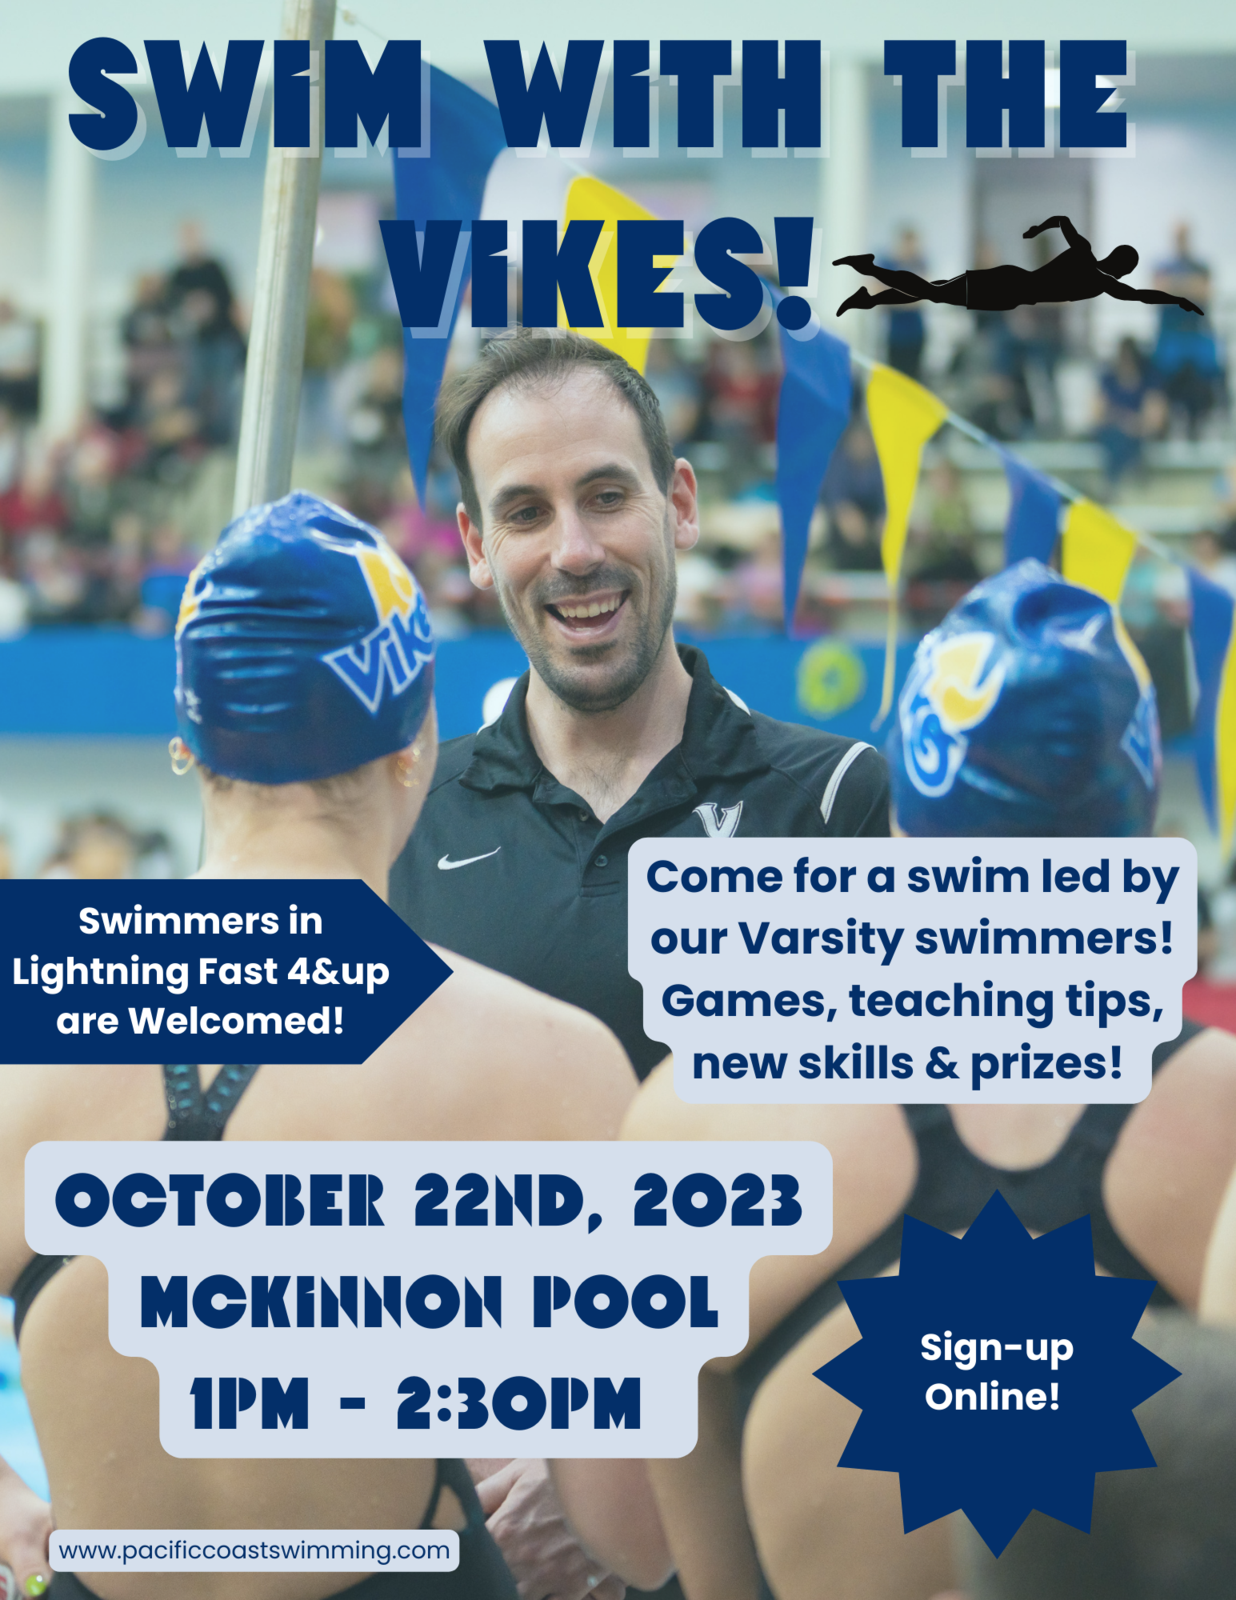 Annual Swim with the Vikes image